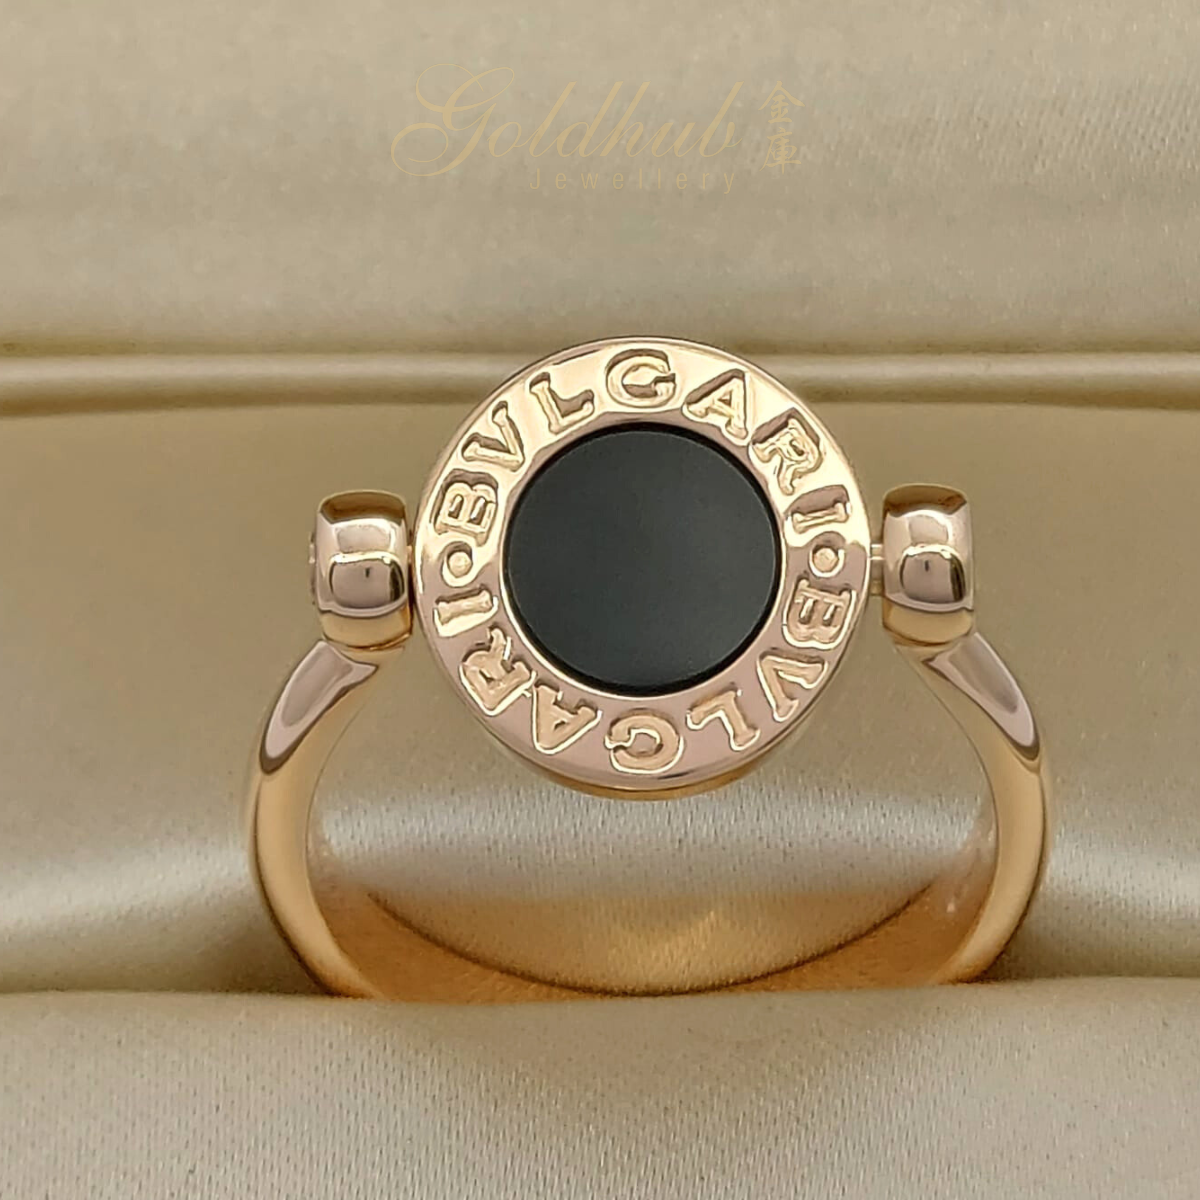 18k Pre-loved Bvlgari Bvlgari Classic Ring with Mother of Pearl and Onyx in Rose Gold